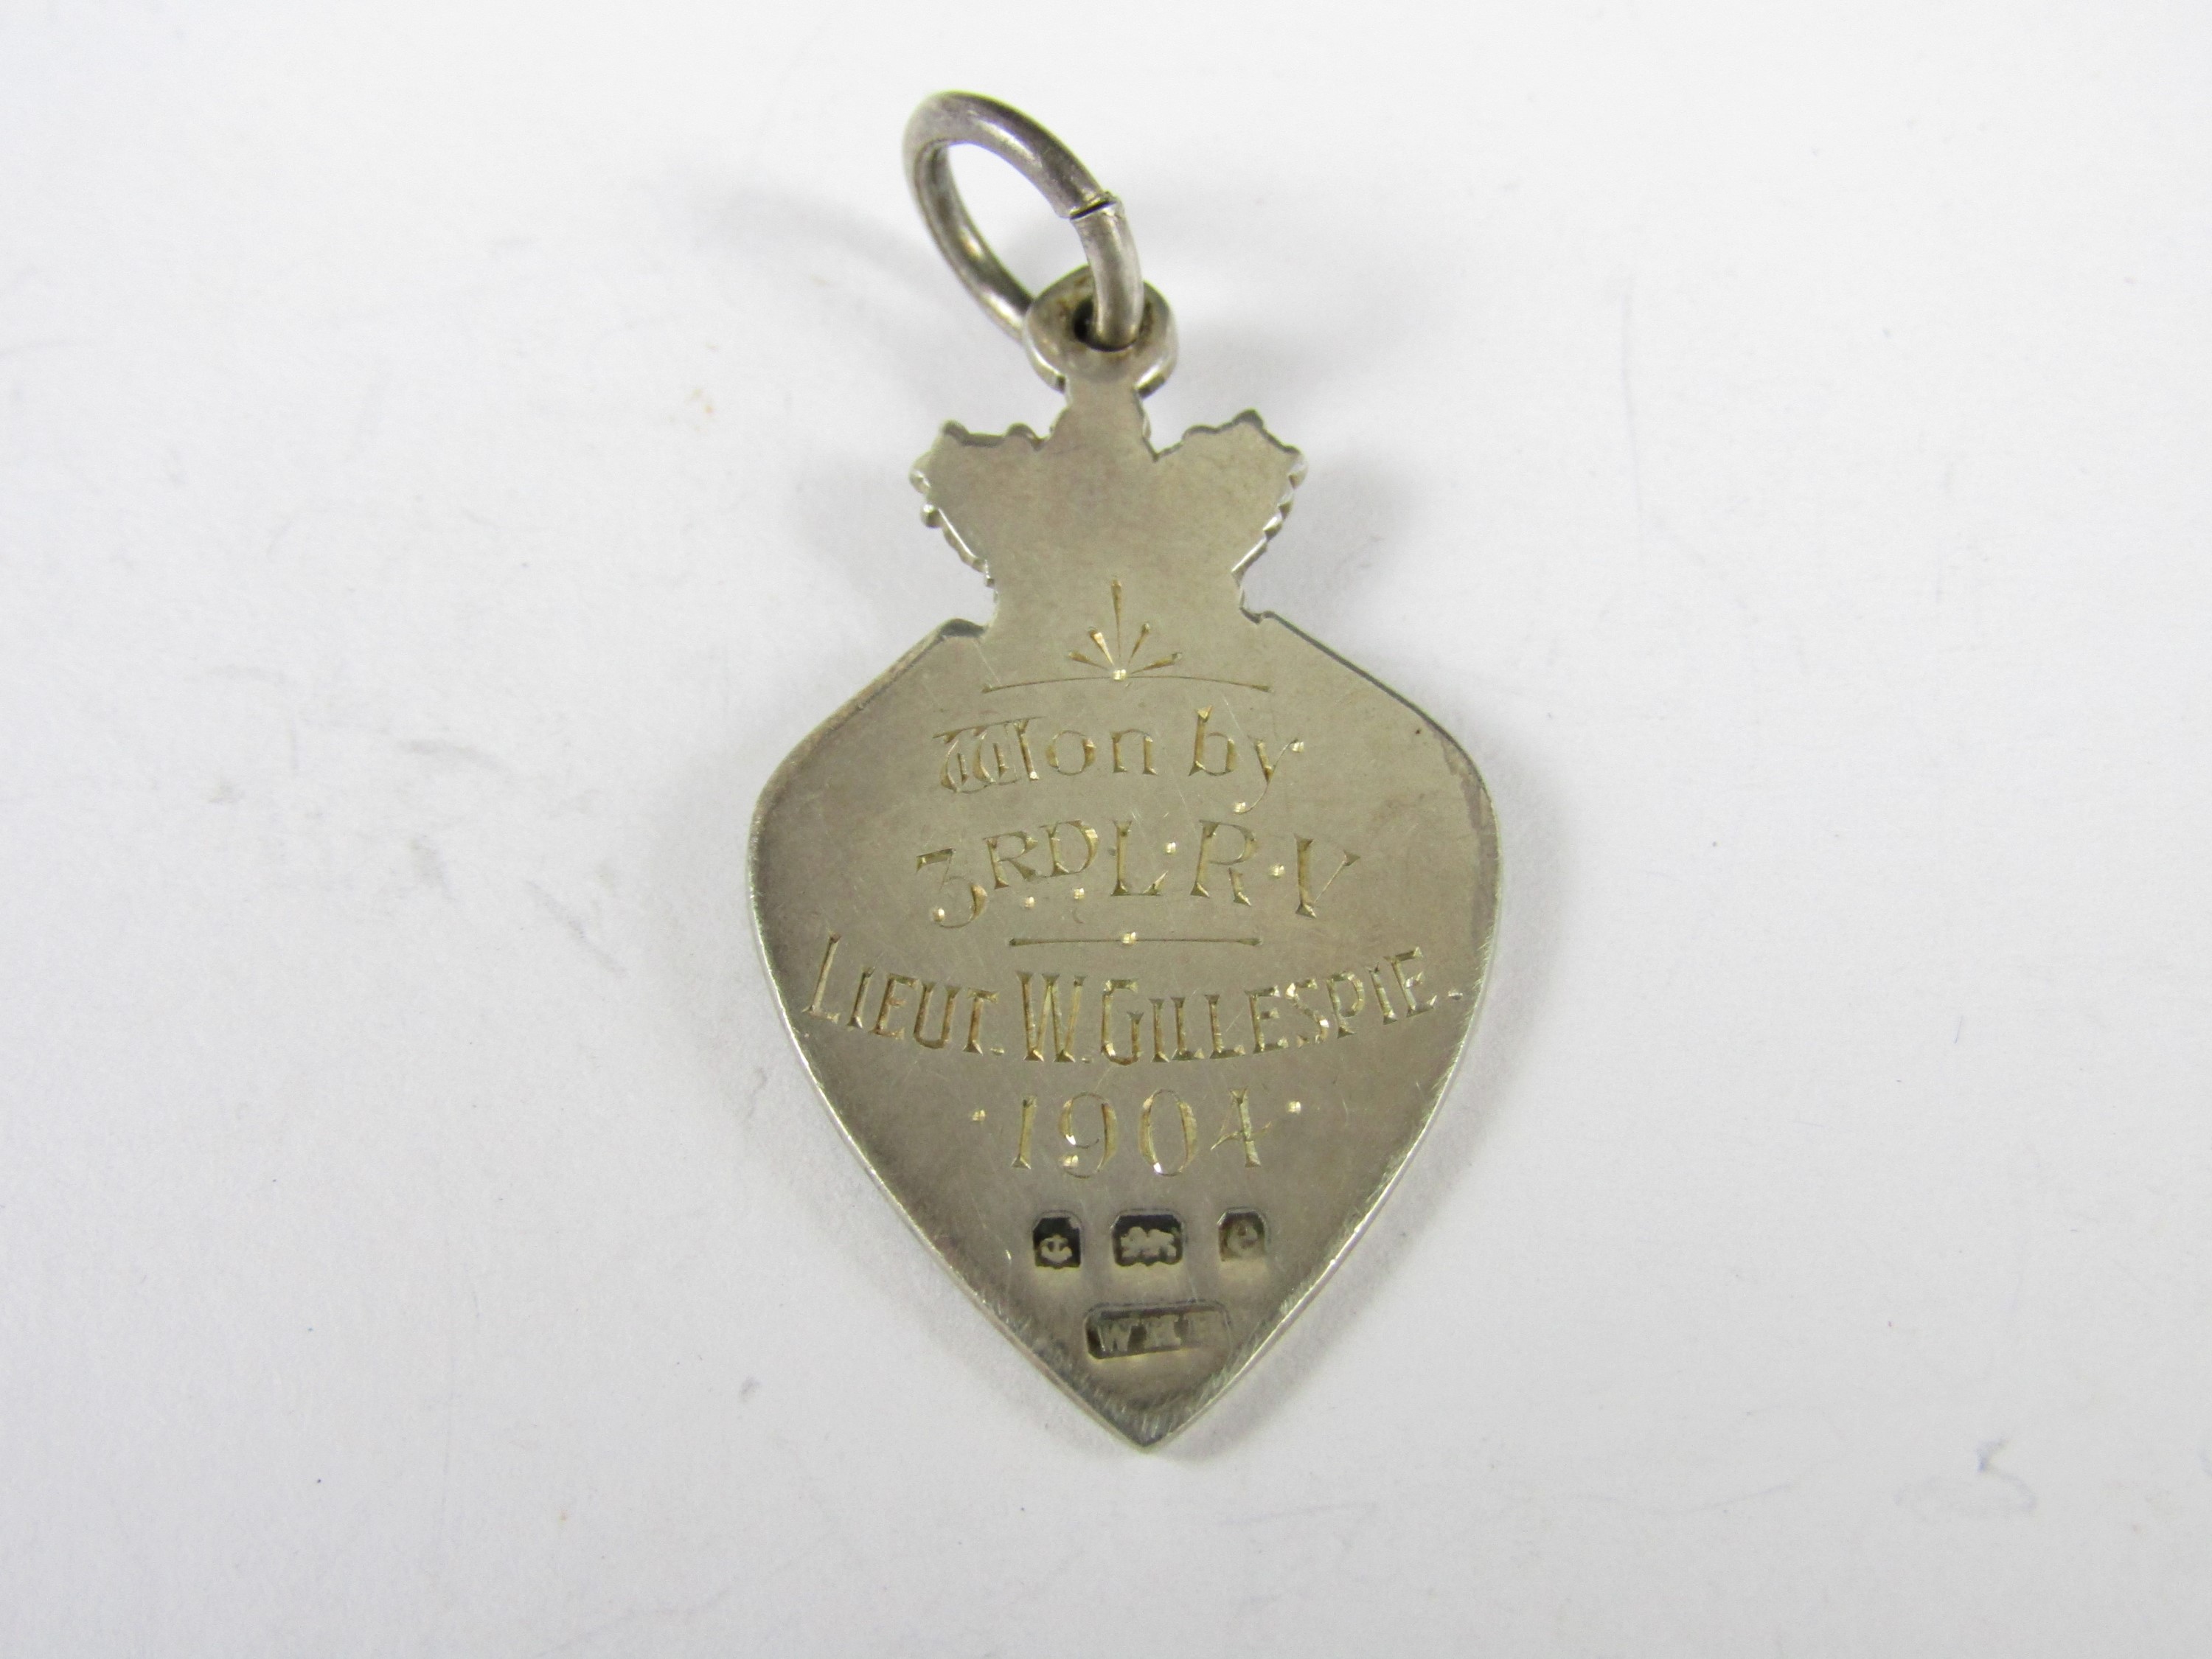 An Edwardian silver Perrier Jouet Cup prize fob medallion awarded to 3rd L R V, Liet W Gillespie, - Image 2 of 2